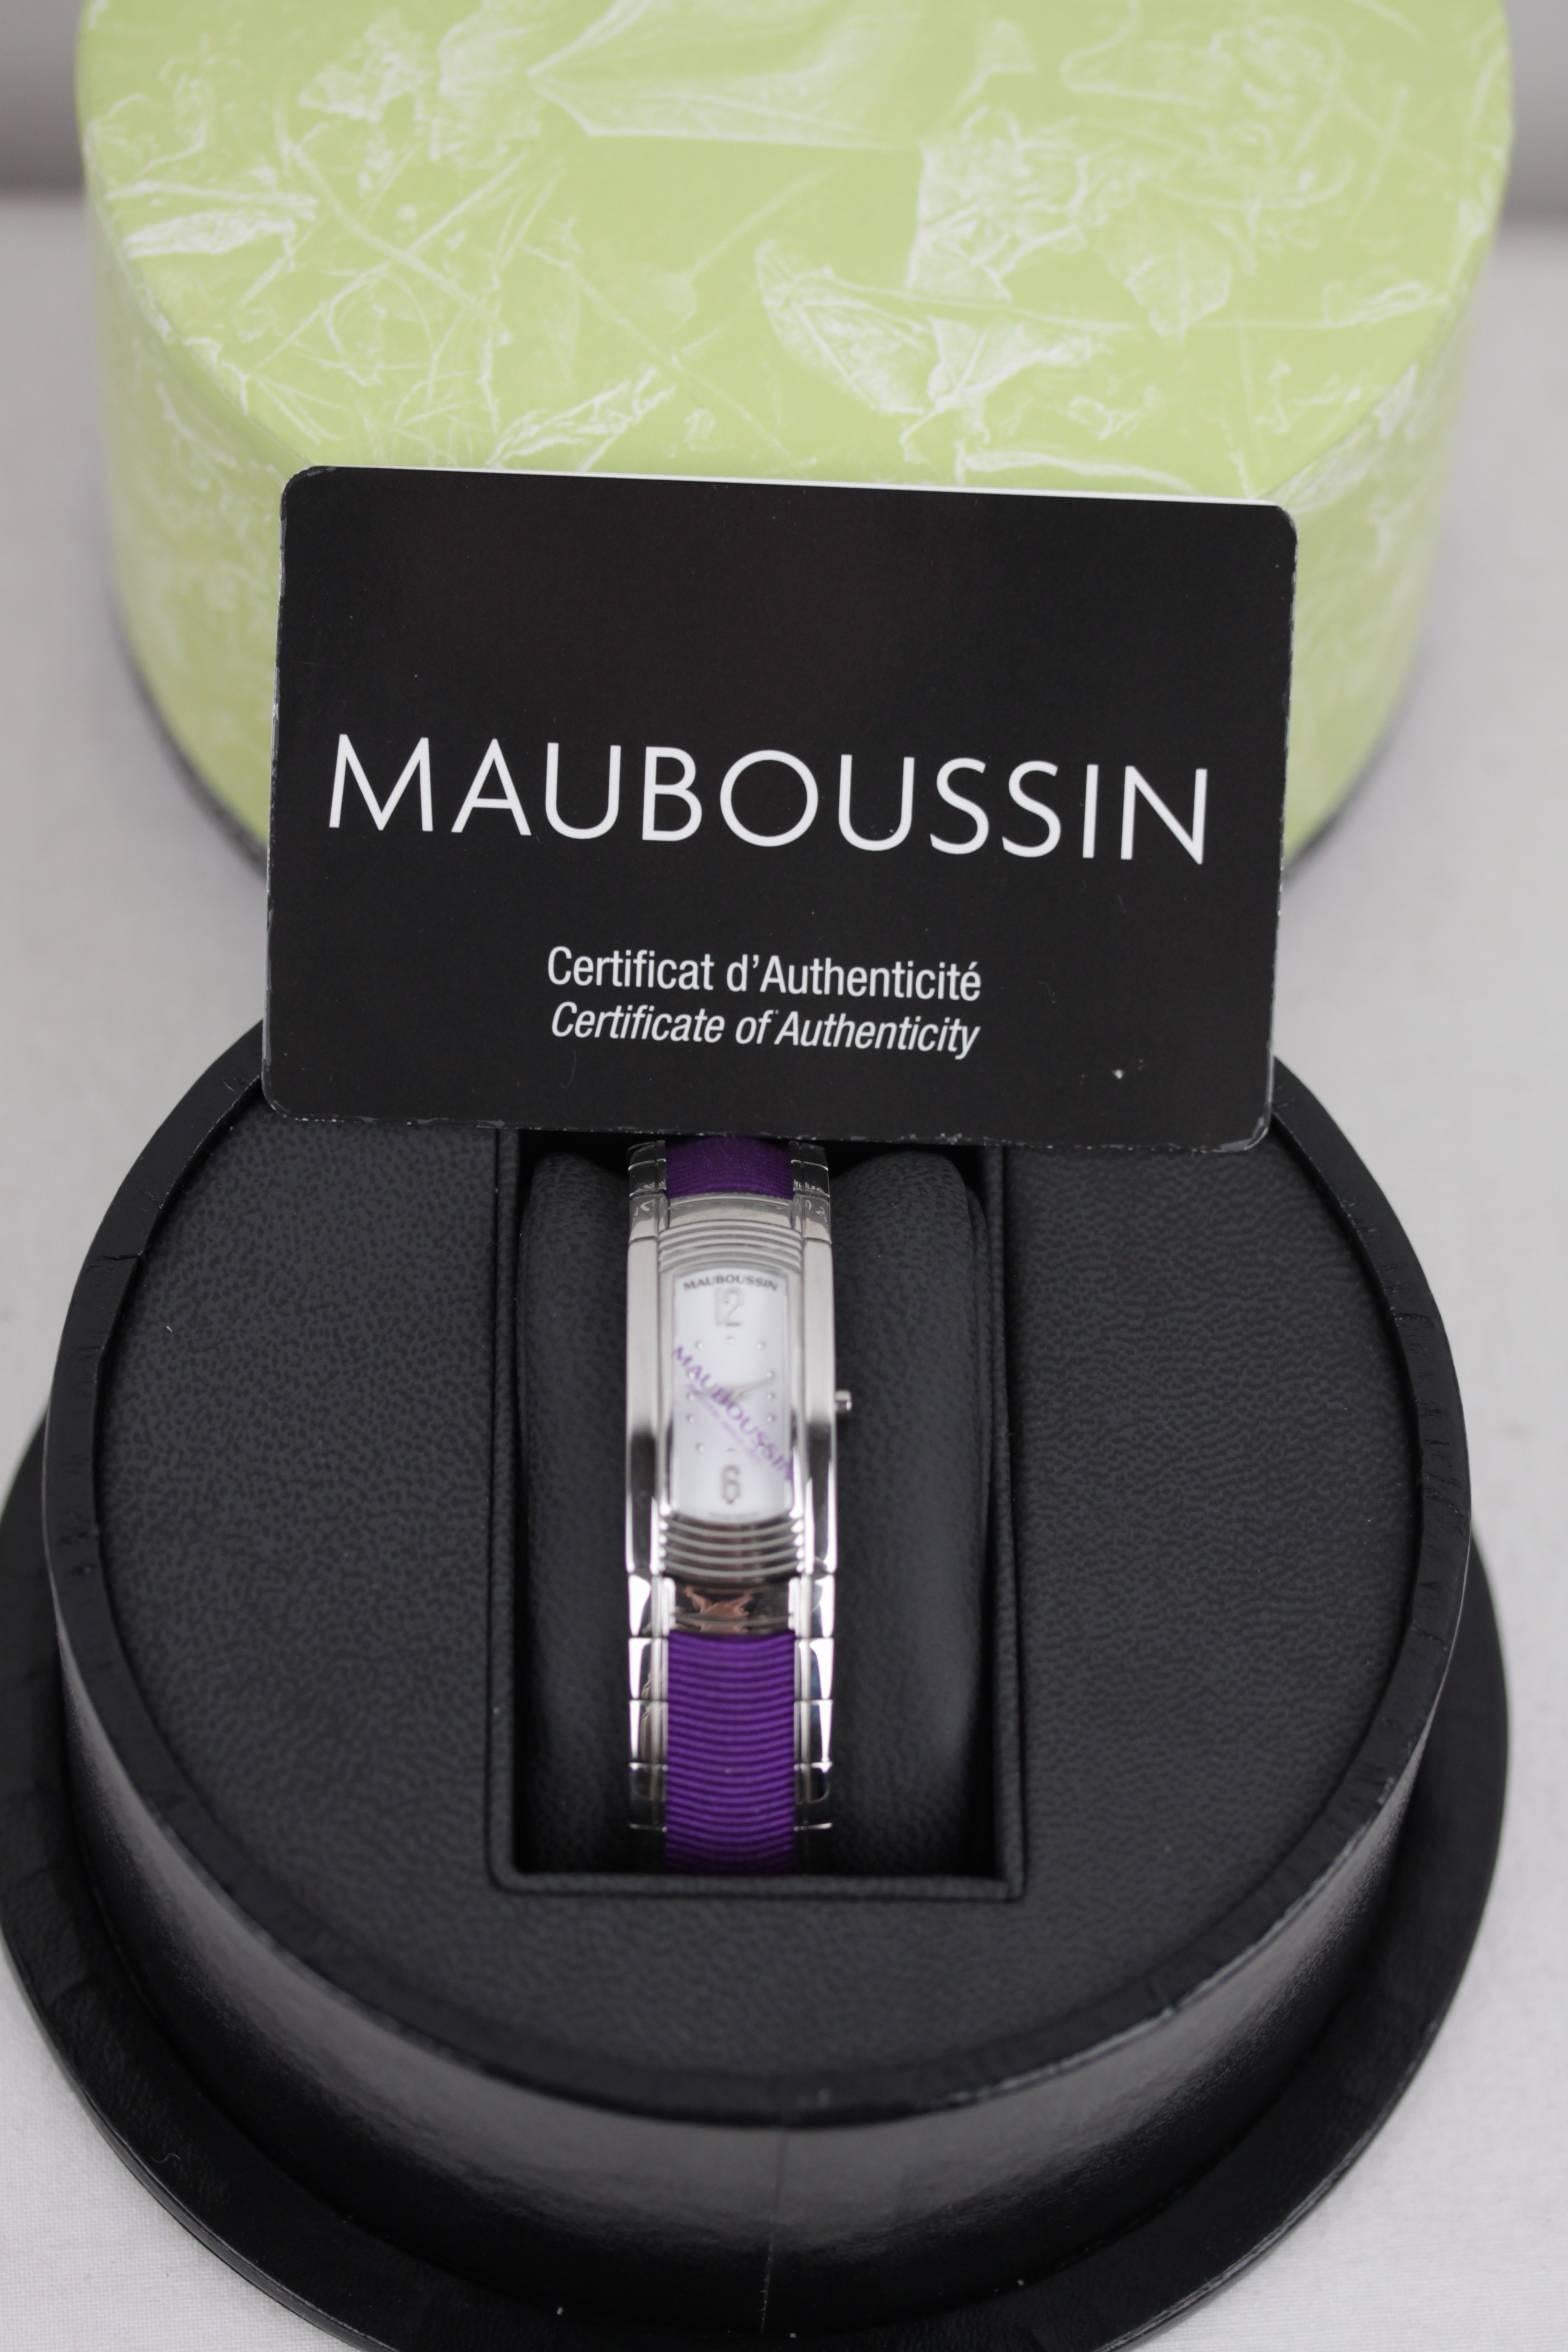  - Mauboussin rectangular stainless steel case with white dial
- Purchased in 2011
- Individual number: 1392 S
- Stainless steel bracelet with purple gros-grain fabric insert
- Quartz movement with battery
- Water resistance tested at 3AT
-